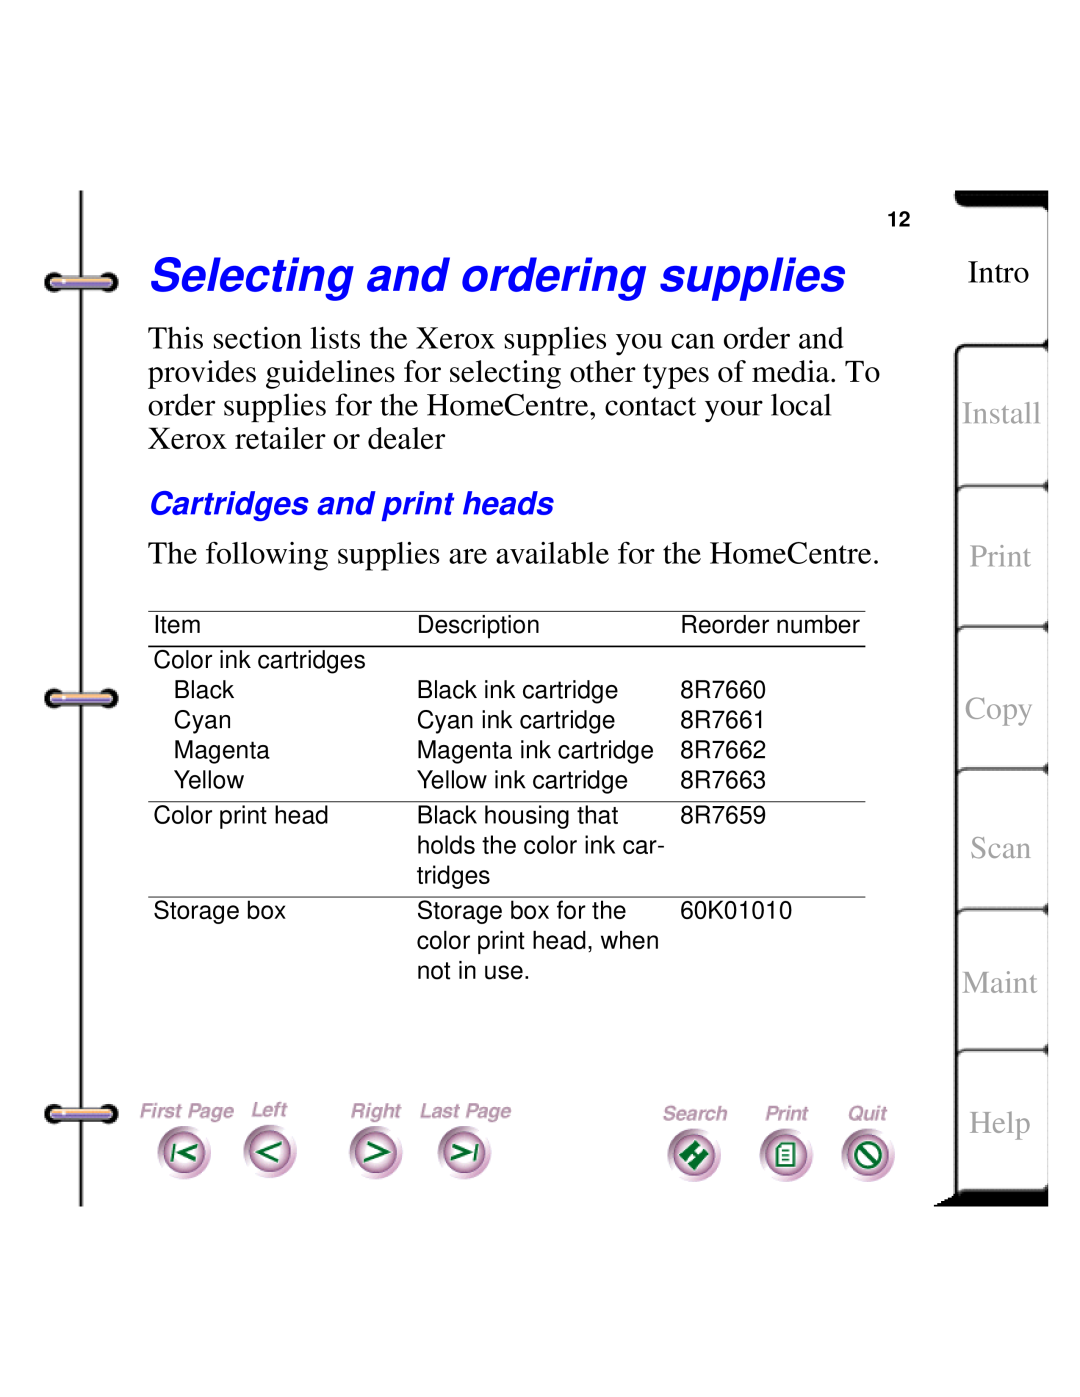 Xerox Document HomeCentre Selecting and ordering supplies, Cartridges and print heads, Install Print Copy Scan Maint, Help 